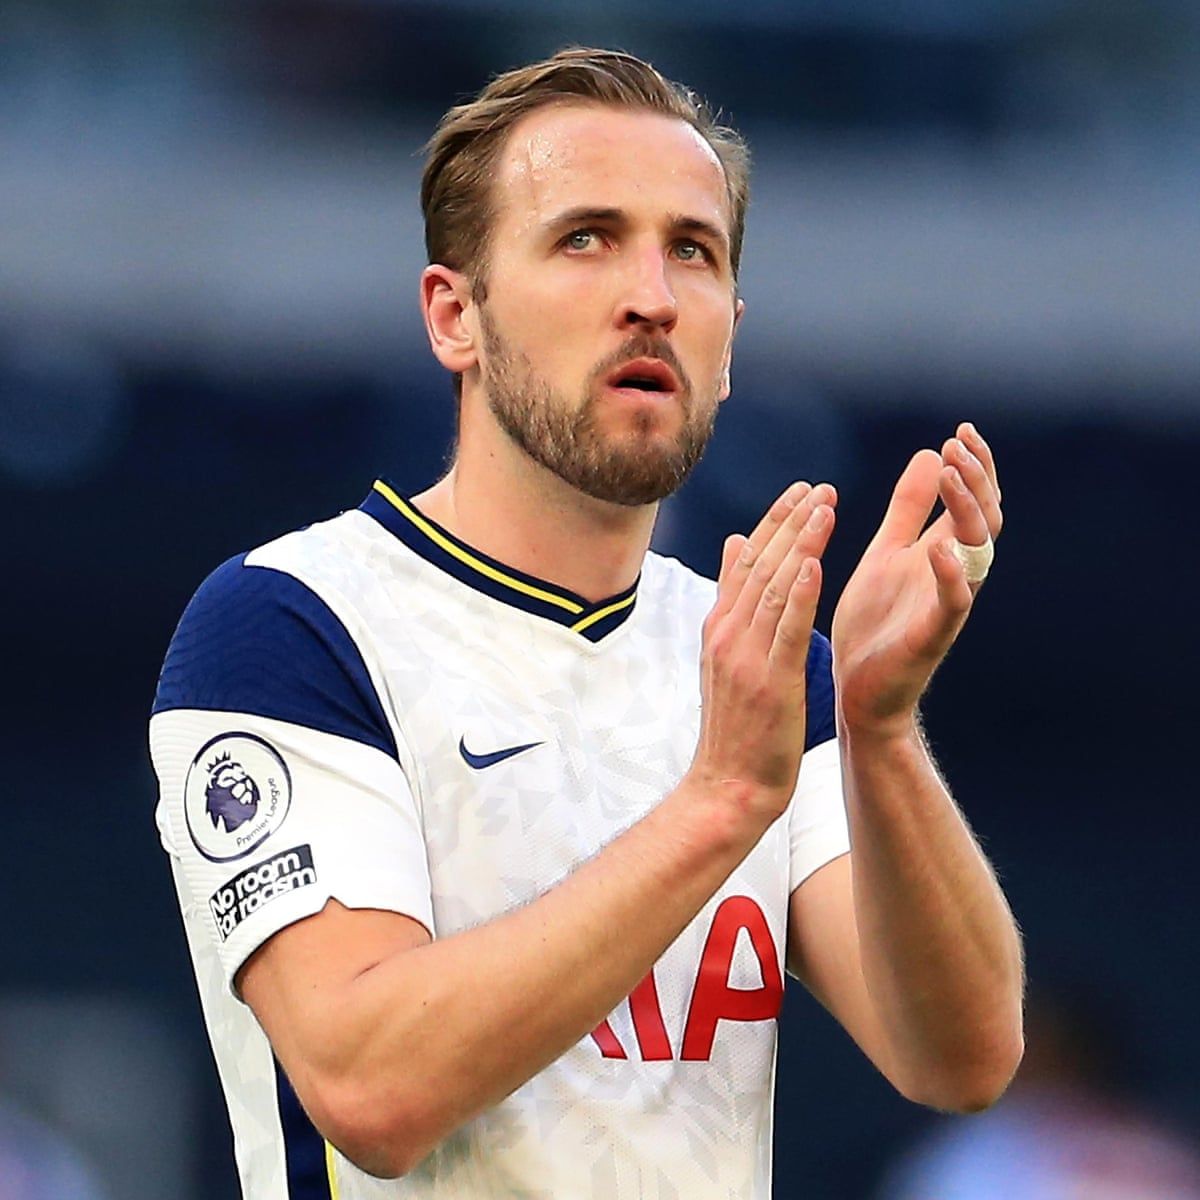 Football Star Harry Kane had a heart attack mid game during half time